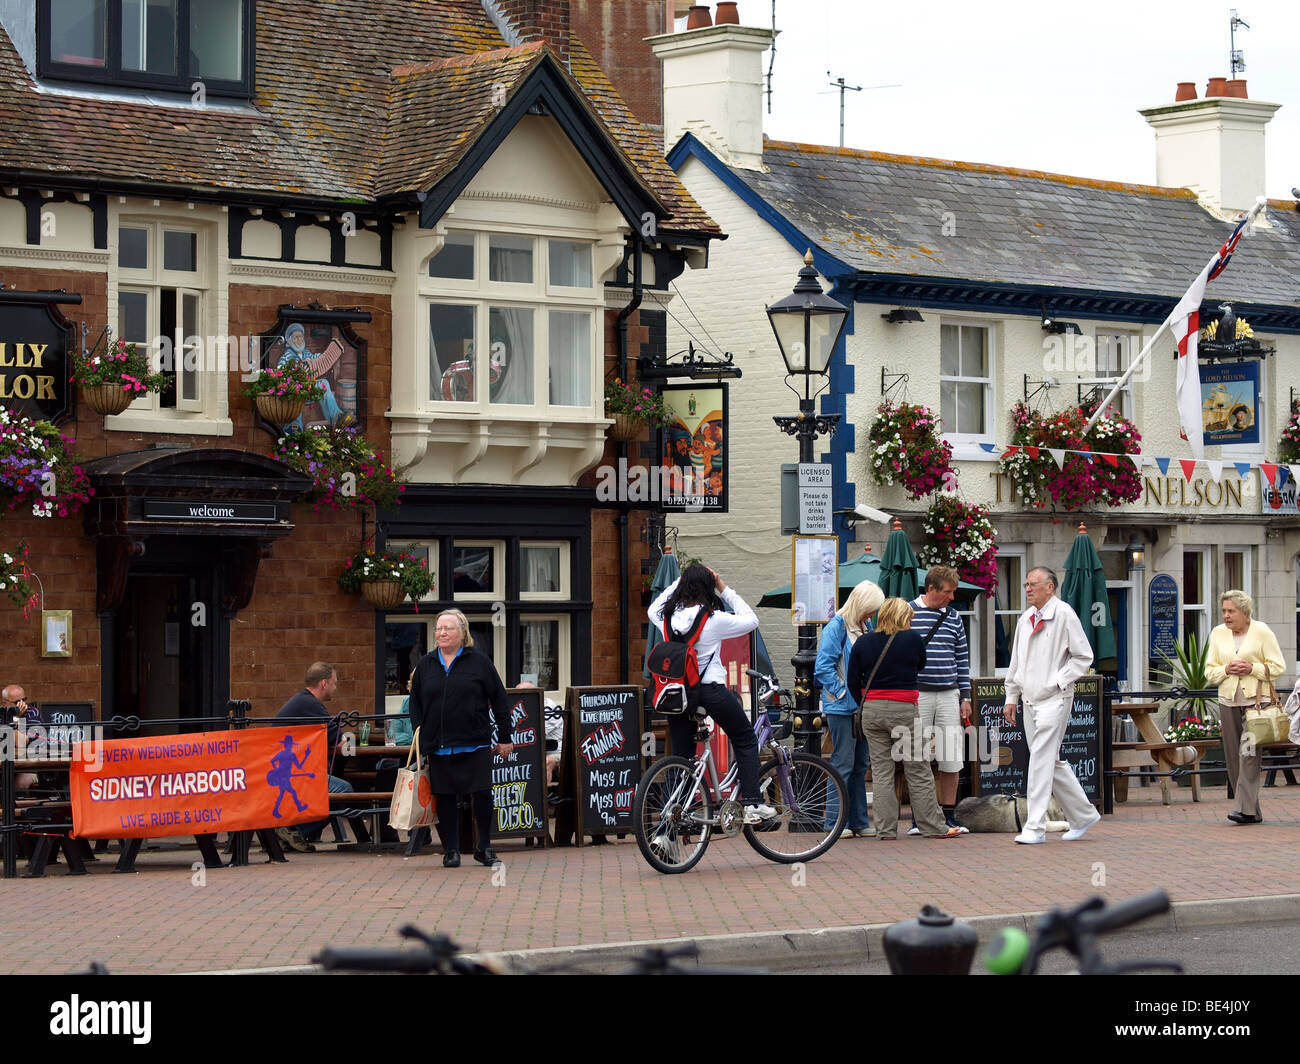 The 'jolly sailor' and the'lord nelson'public houses on the quayside at Poole,Dorset. Stock Photo